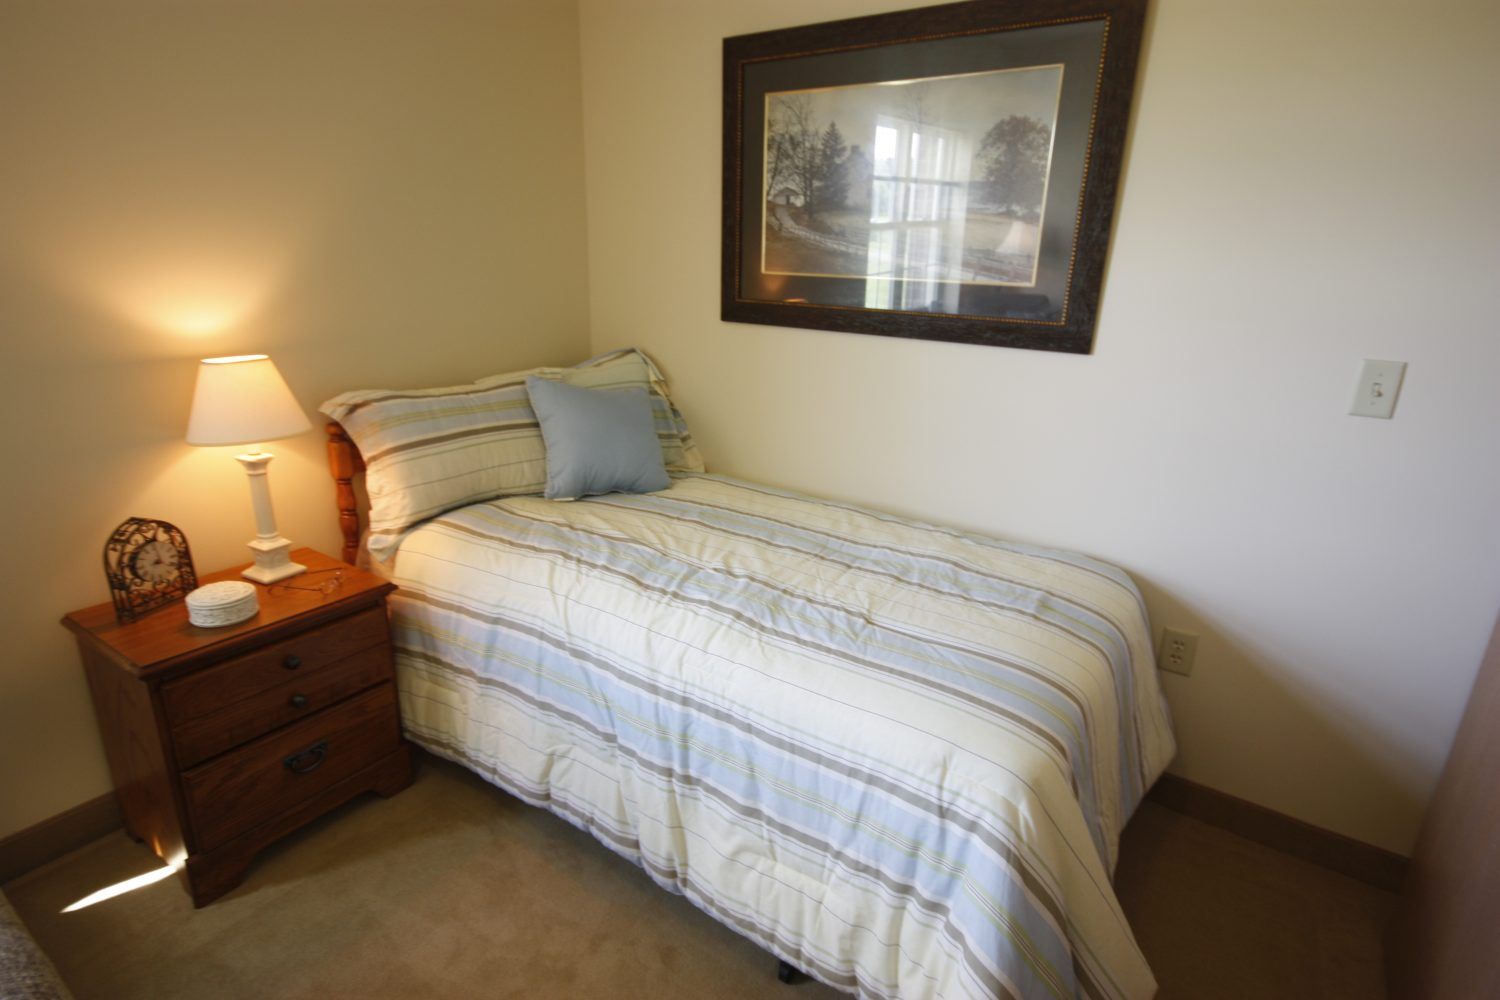 Interior view of a cozy bedroom at Heritage Woods of Freeport senior living community.